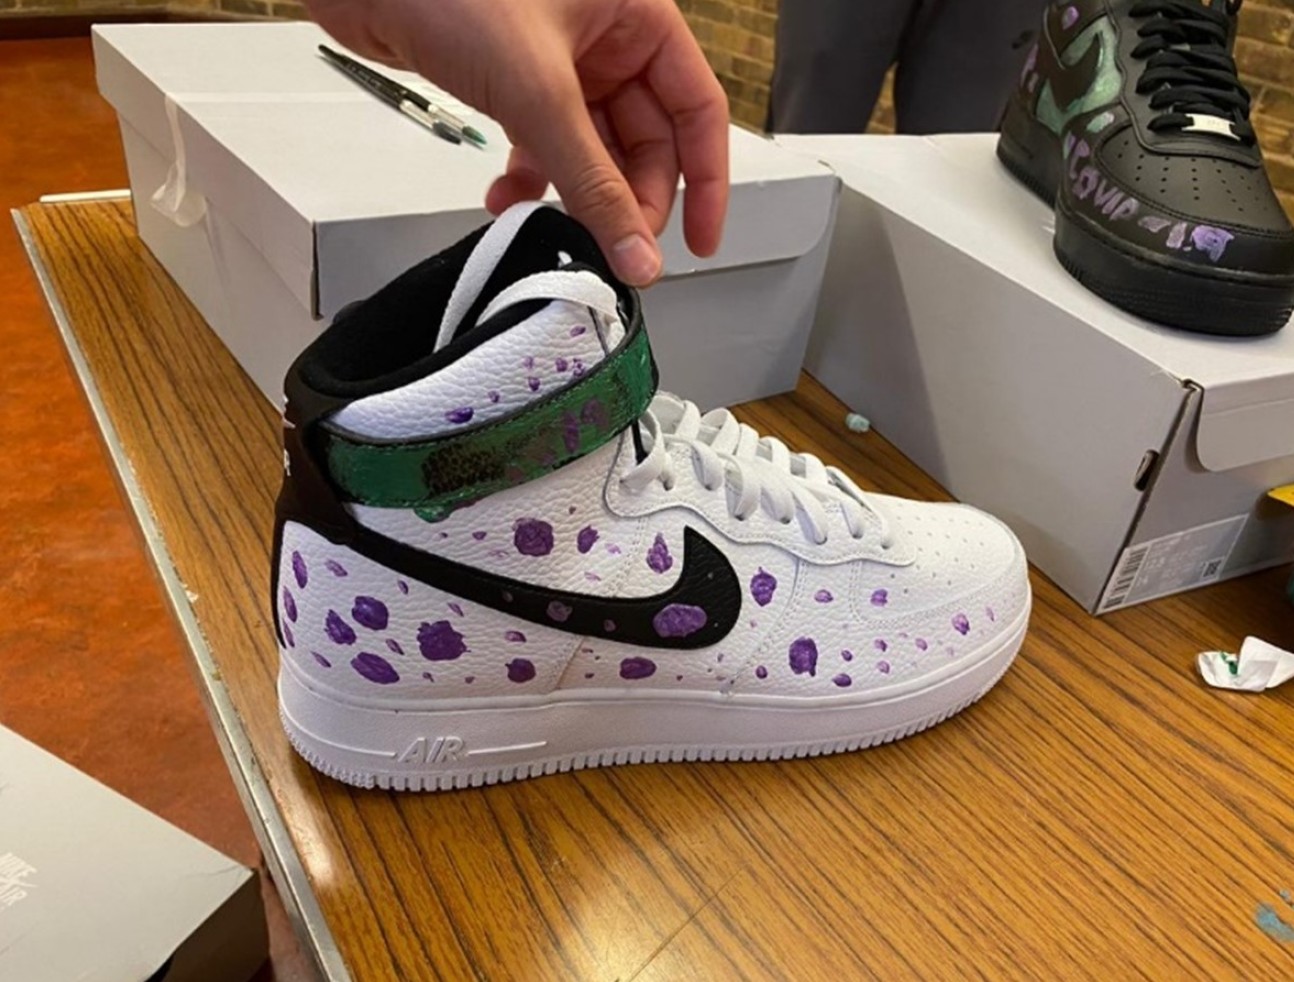 A white nike sneaker with purple dots painted on